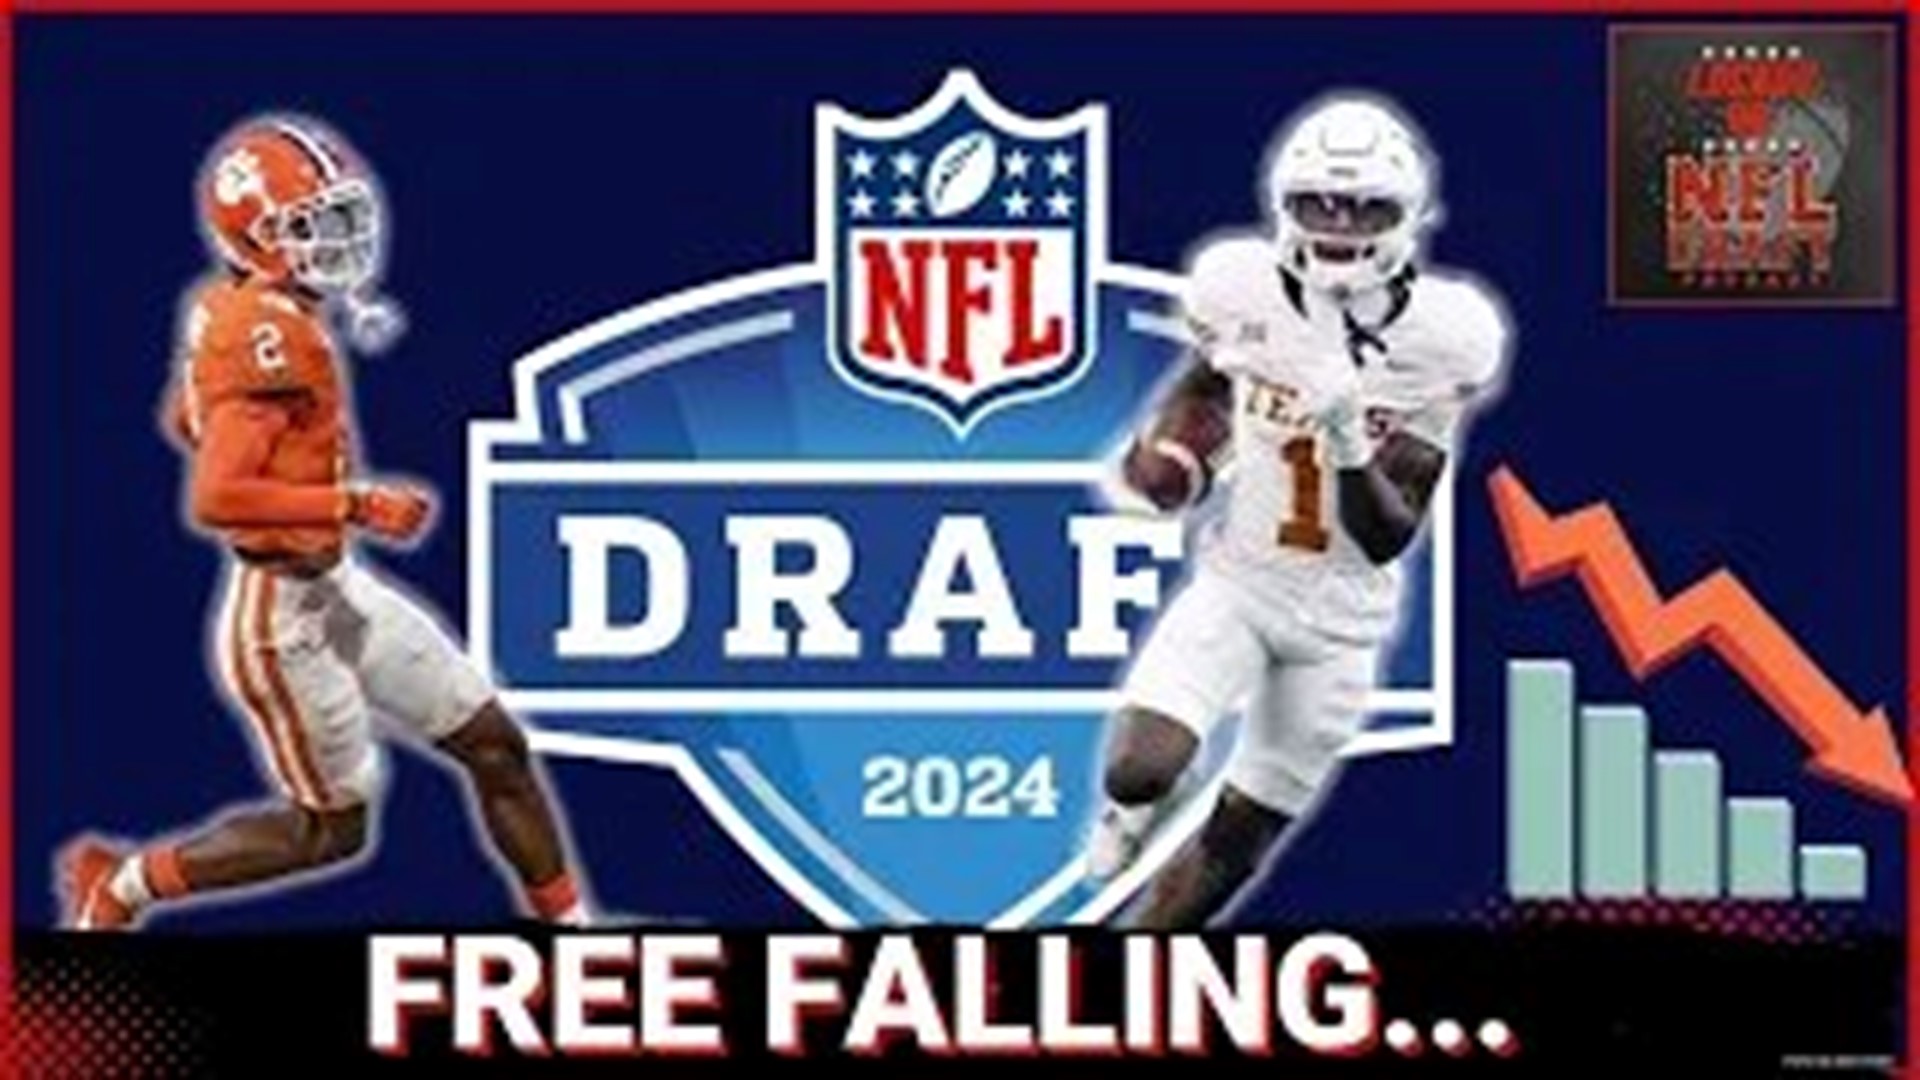 The 2024 NFL Draft is days away and things can change on a dime. Which consensus 1st round draft prospects could find themselves sliding out of round 1?